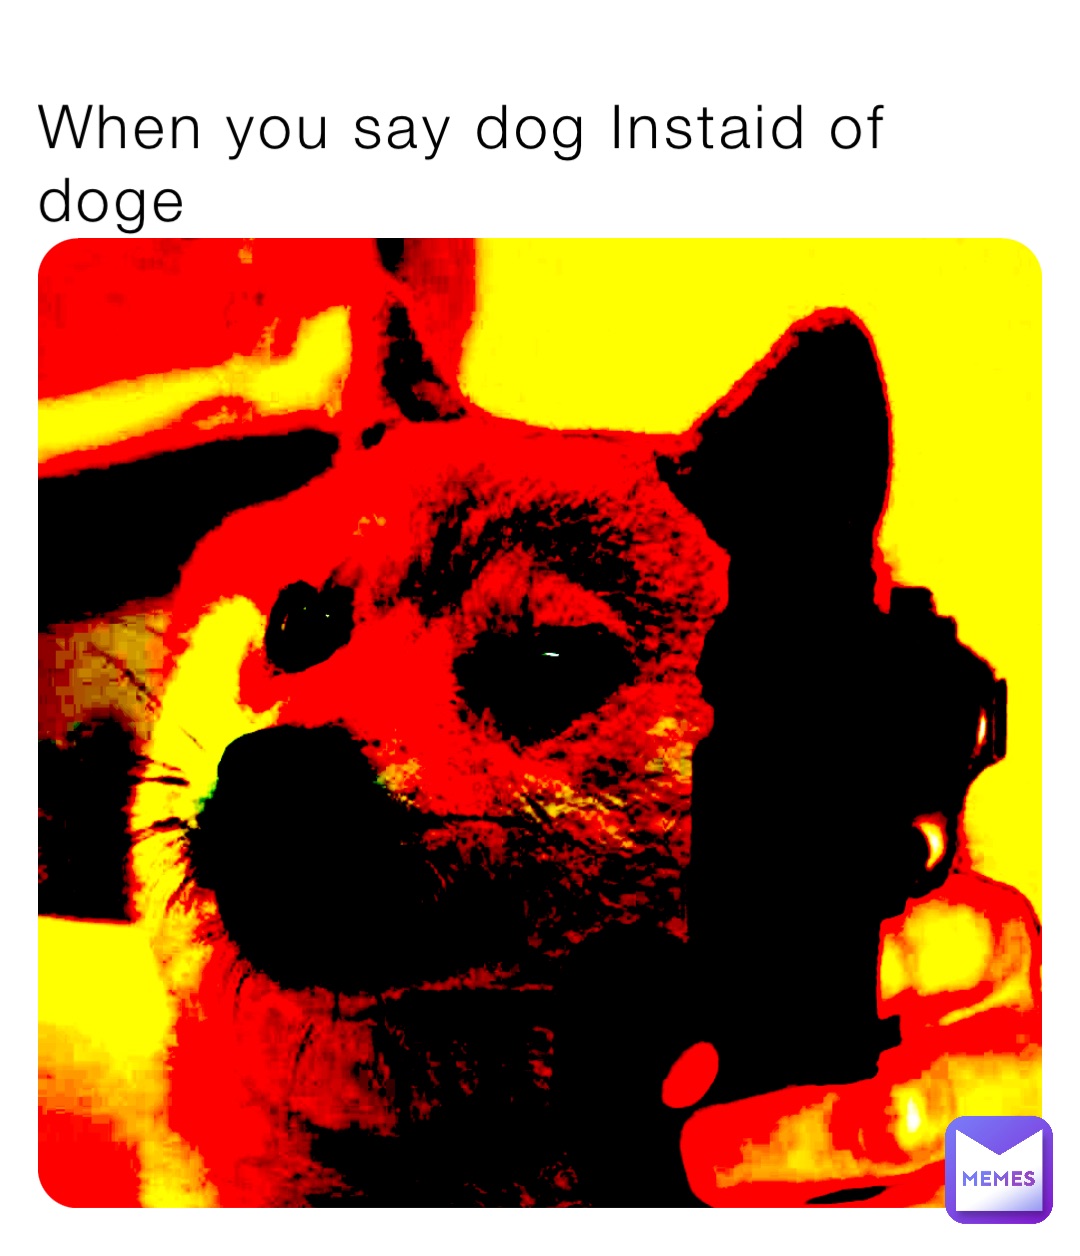 When you say dog Instaid of doge